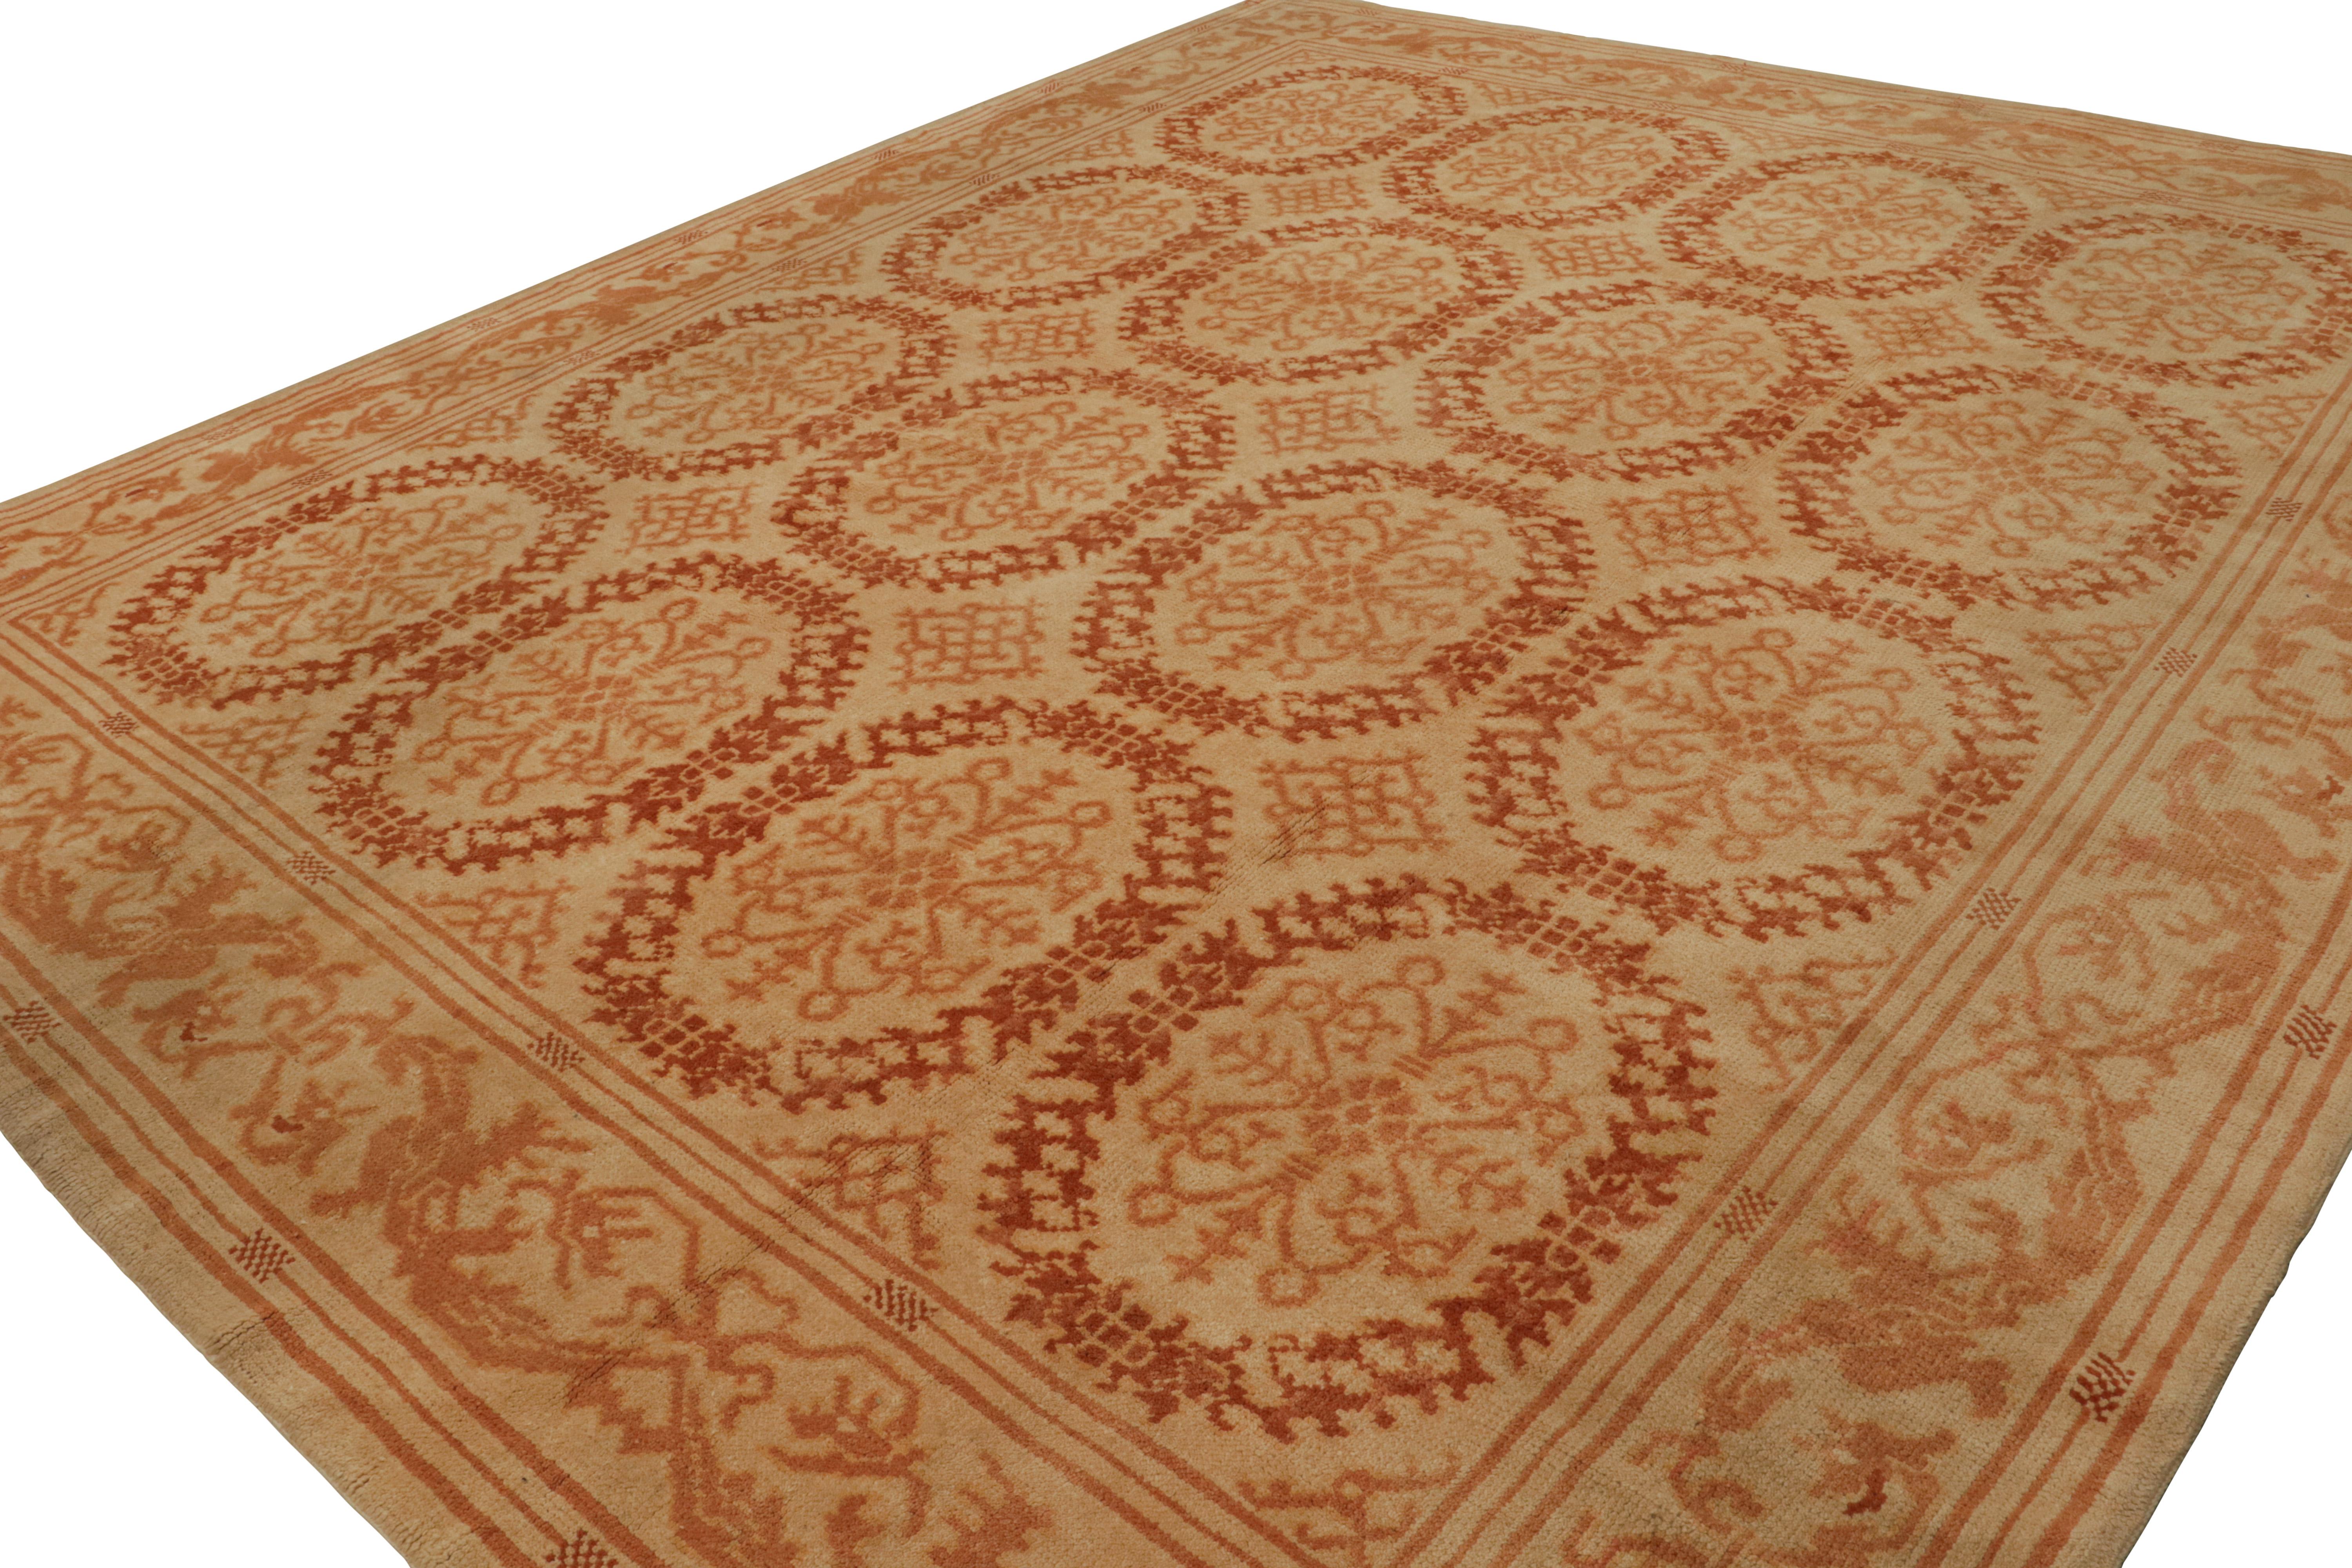 Hand Knotted in wool, this 12x14 European rug with a mediterranean warmth in its beige and red colorway in the medallions and the field, has been inspired by the old world Spanish architectural style. 

On the Design: 

Admirers of the craft may